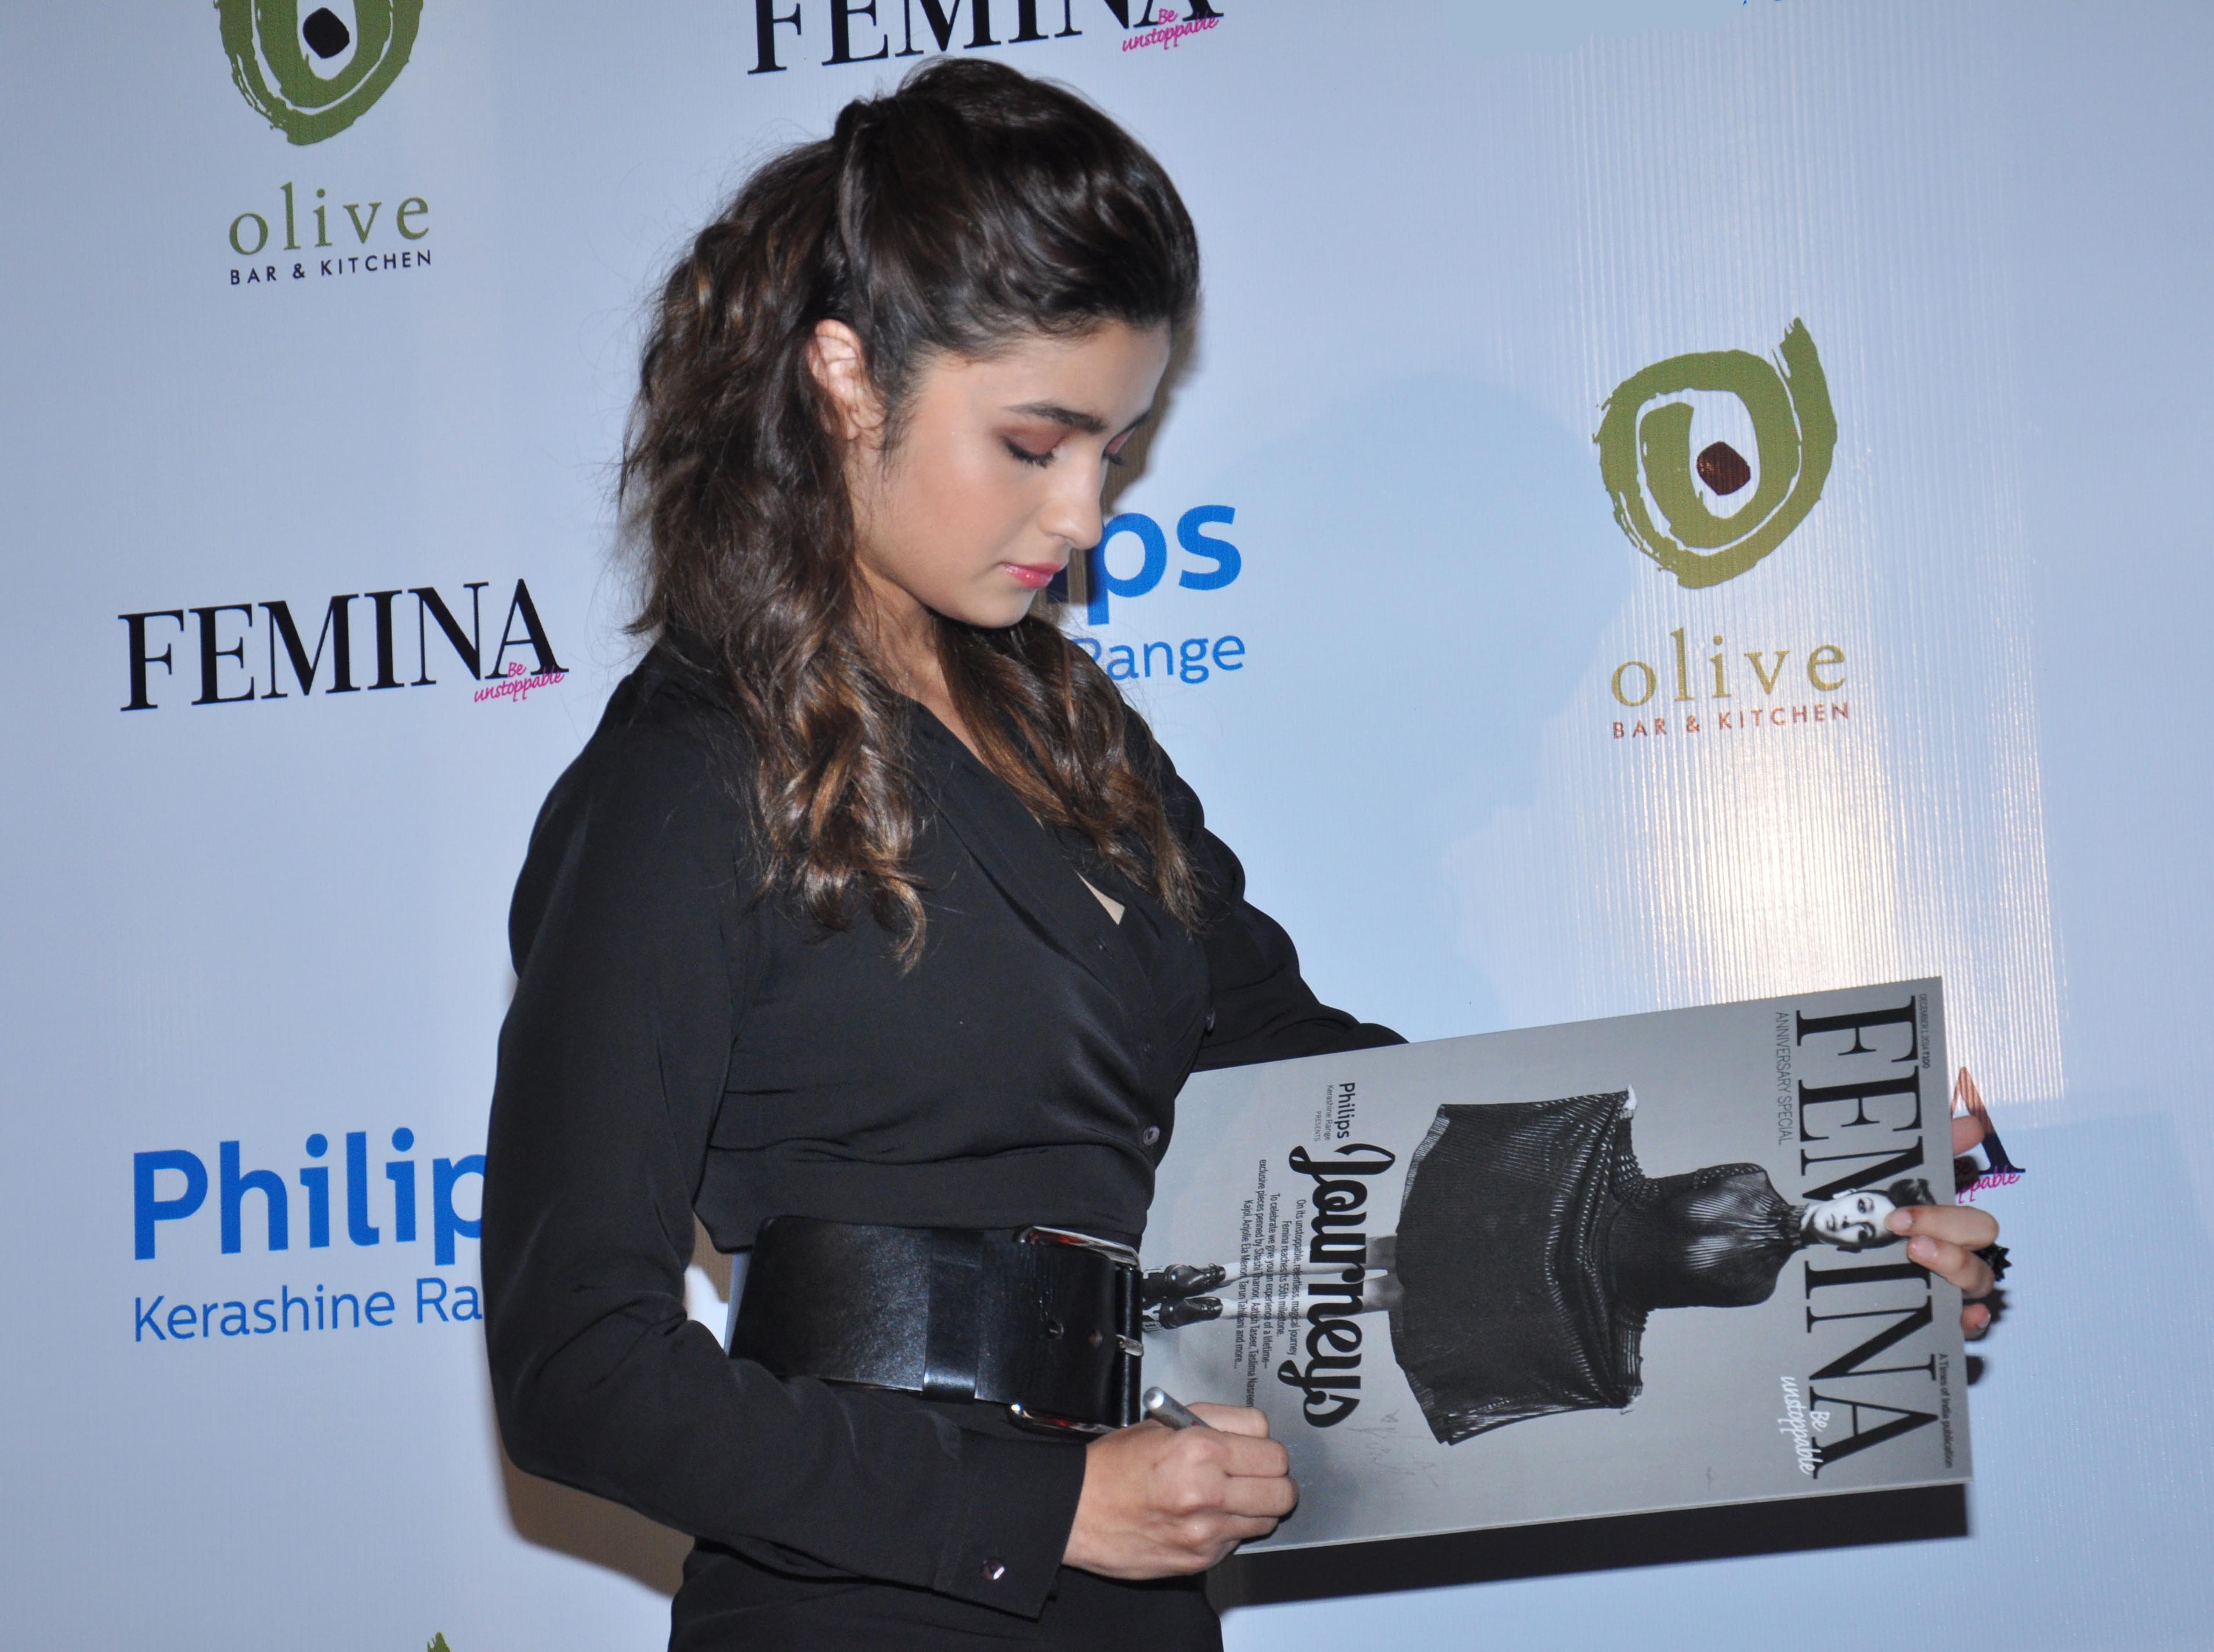 Alia Bhatt graced the cover launch of Feminas 55th Anniversary issue at Guppy by Olive.5